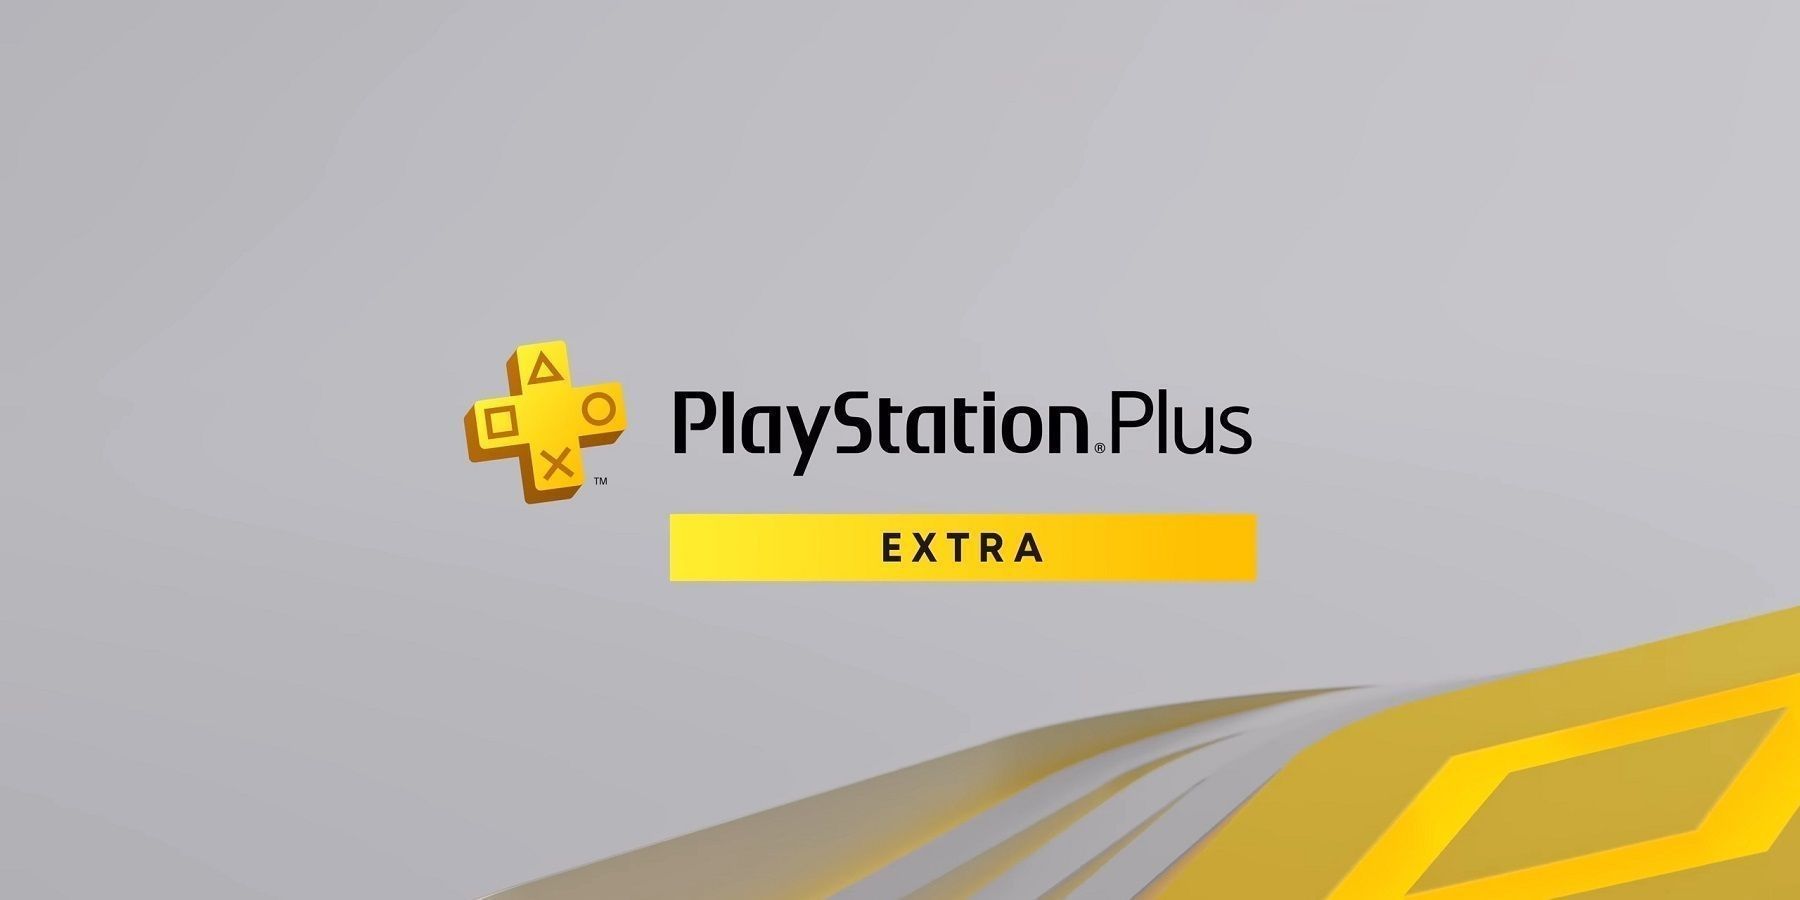 Assassin's Creed Valhalla Leaves PS Plus Extra on 20th December